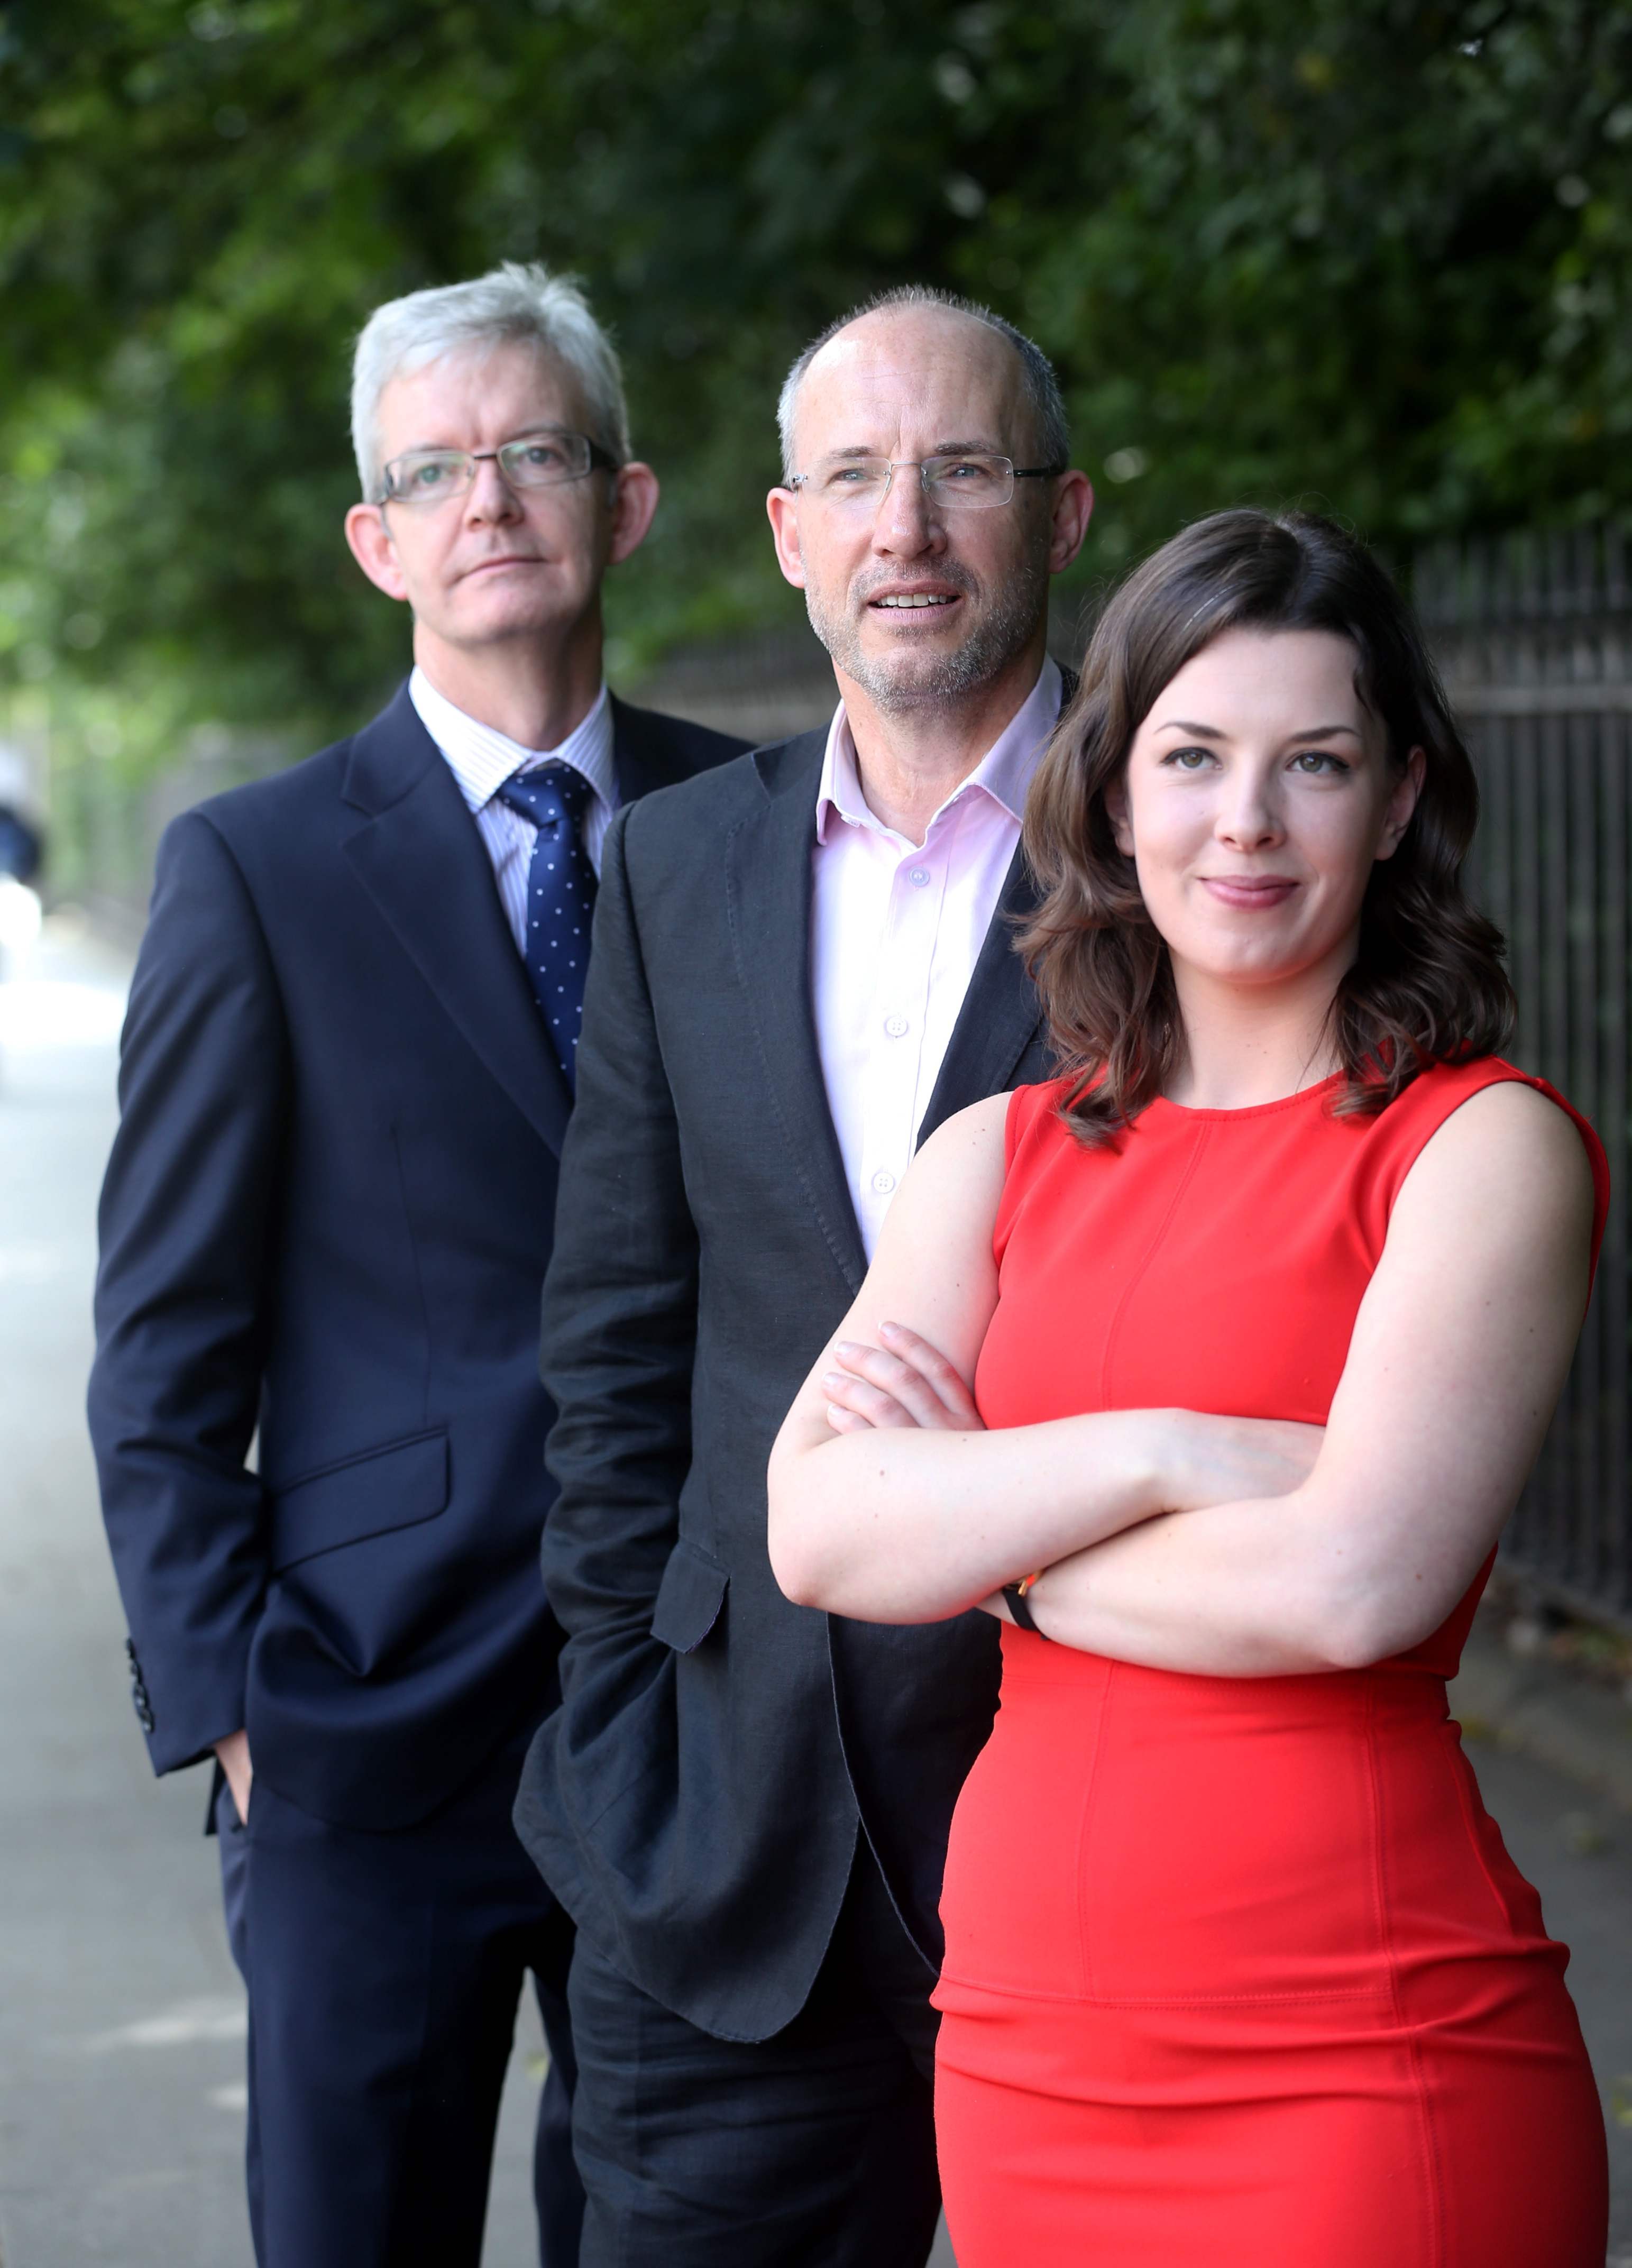 left to right: Joe Healy, Manager of Enterprise Irelands HPSU Accelerate Department, Anthony Quigley, Chairman, Code Institute and Helen Norris, Marketing Manager, Kernel Capital. Picture Jason Clarke